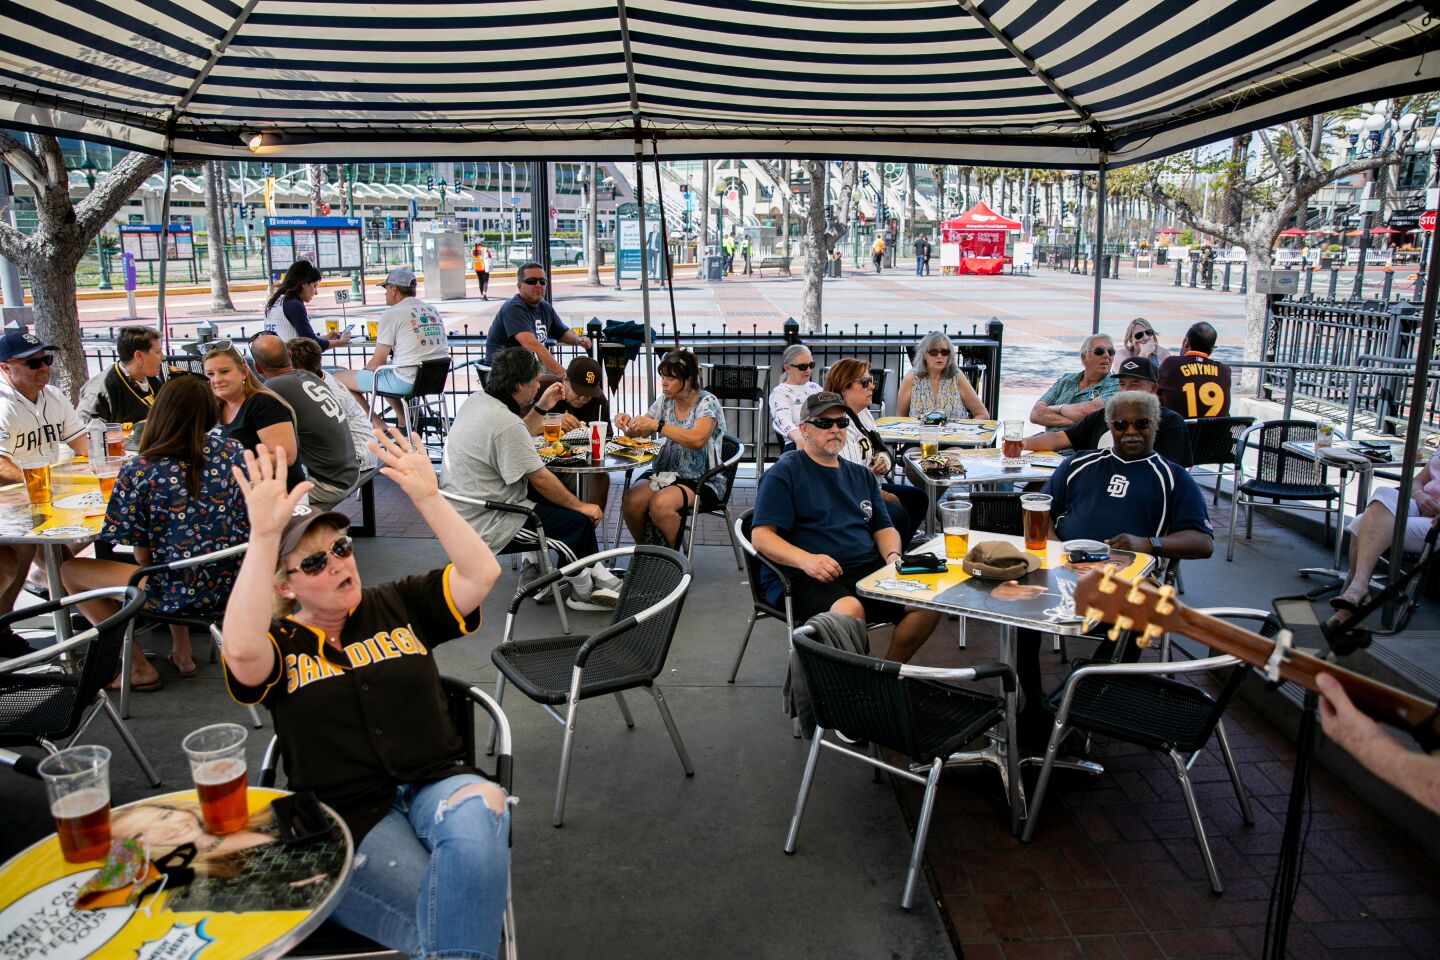 Padres fans take in a baseball-themed musical performance at The Tin Fish Gaslamp before the start of the Opening Day game between the San Diego Padres and the Arizona Diamondbacks in Downtown San Diego near Petco Park on Thursday, April 1, 2021 in San Diego, CA. The San Diego Padres welcomed a limited number of fans back into the stadium on Thursday for the first time since the beginning of the coronavirus pandemic.